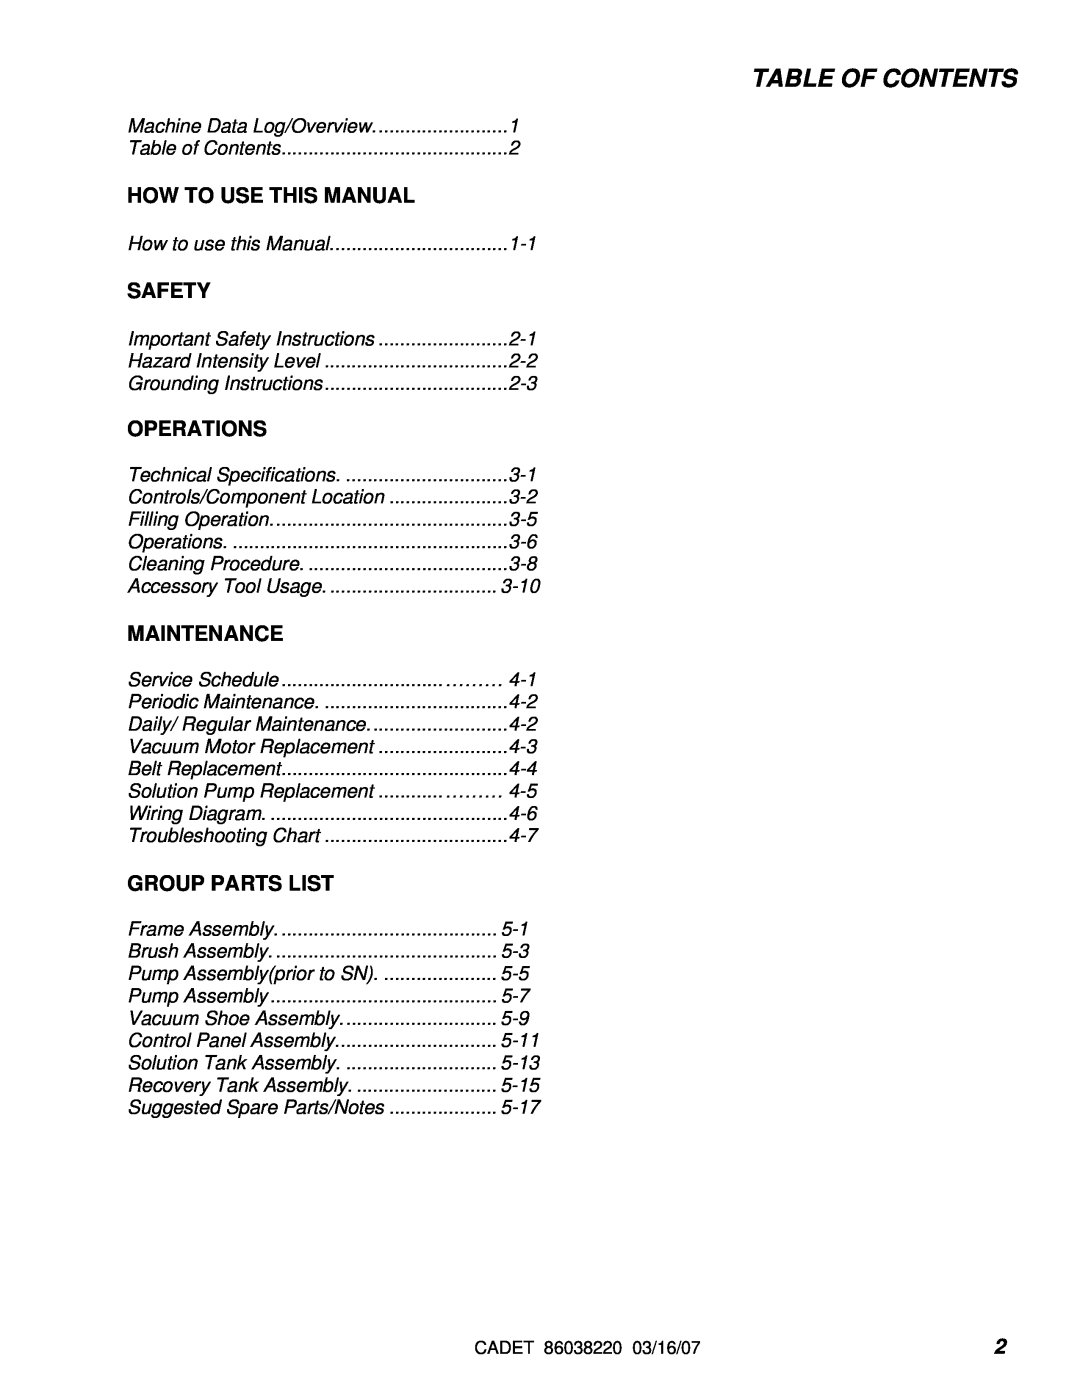 Windsor CDT7, 10080220 manual Table Of Contents, How To Use This Manual, Safety, Operations 